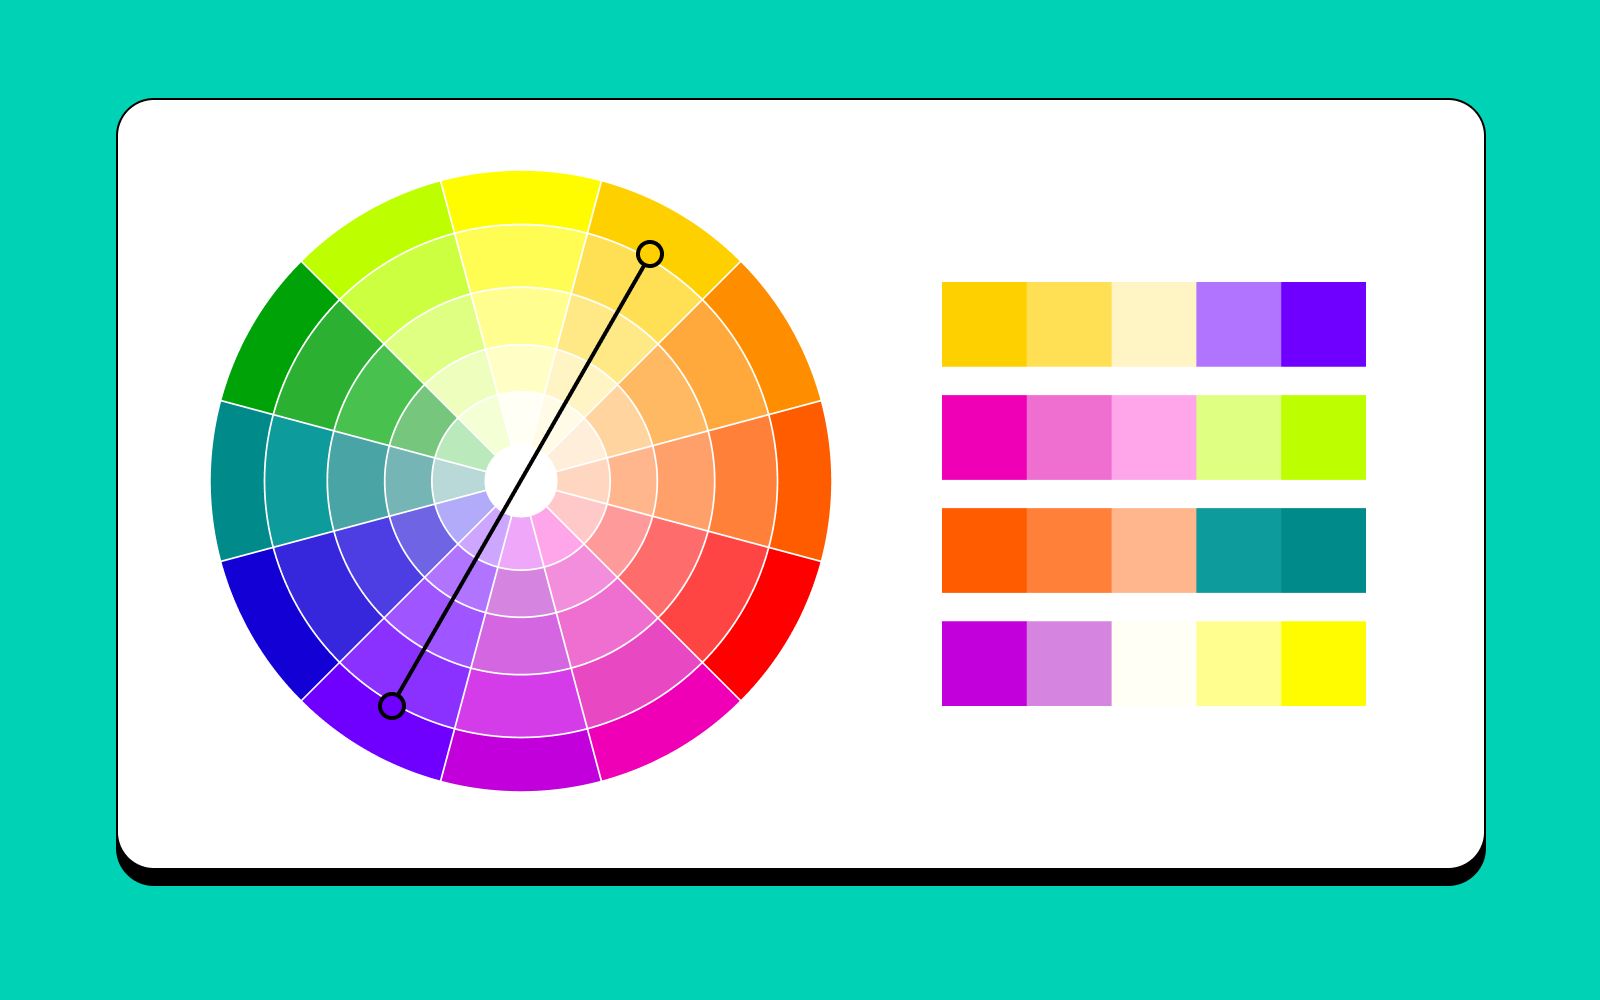 Complementary color palette